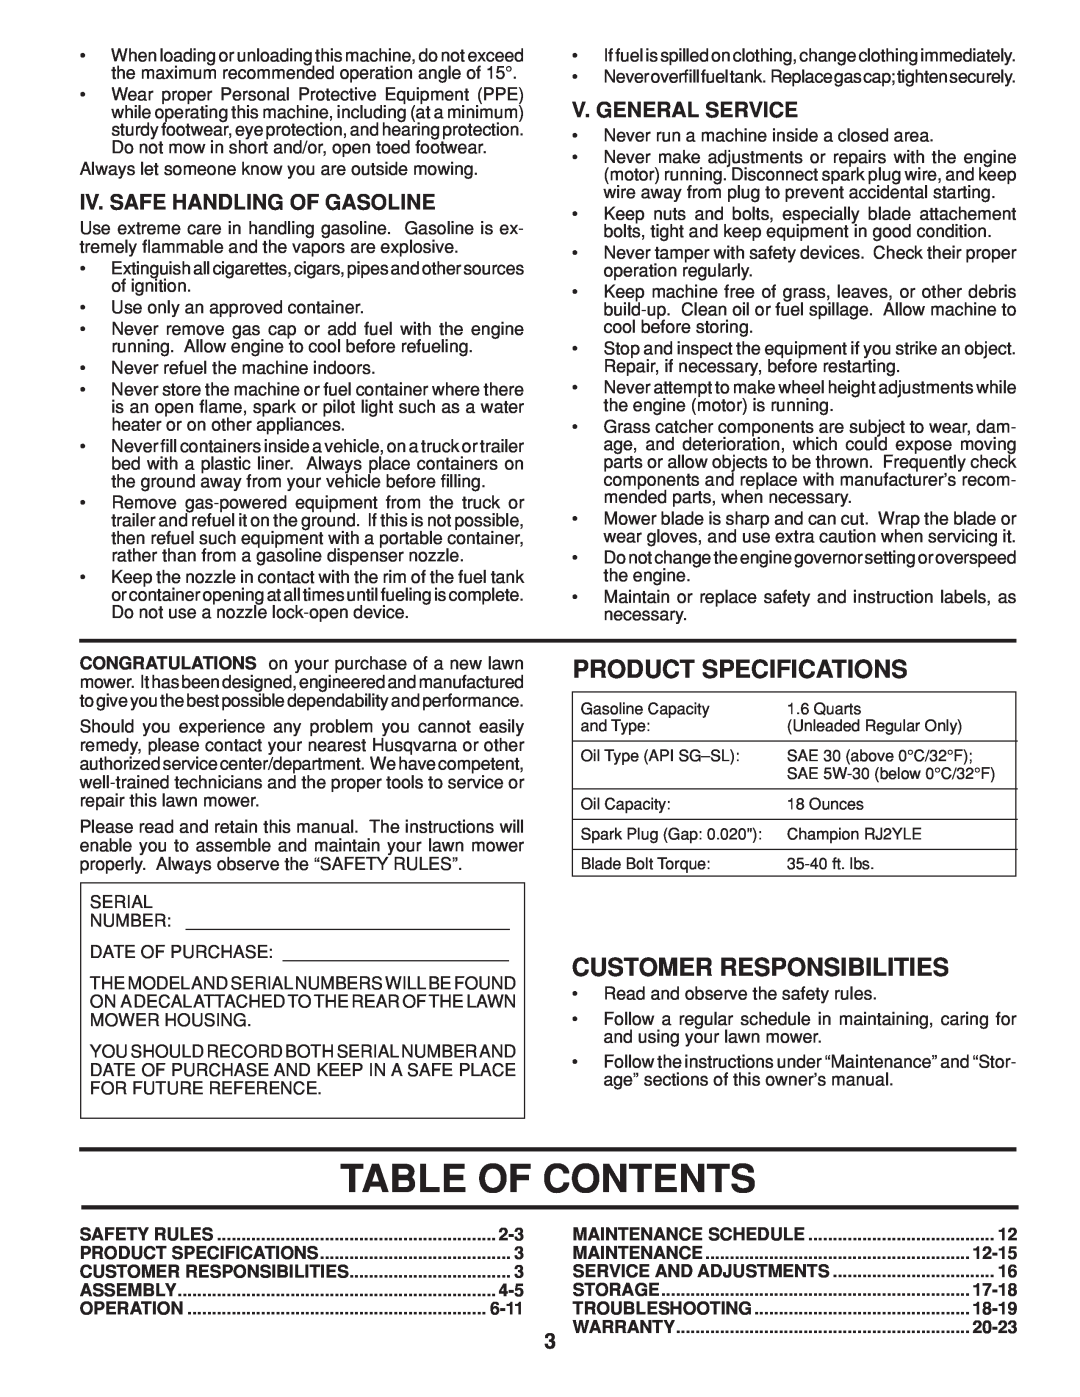 Husqvarna 961430104 Table Of Contents, Product Specifications, Customer Responsibilities, Iv. Safe Handling Of Gasoline 